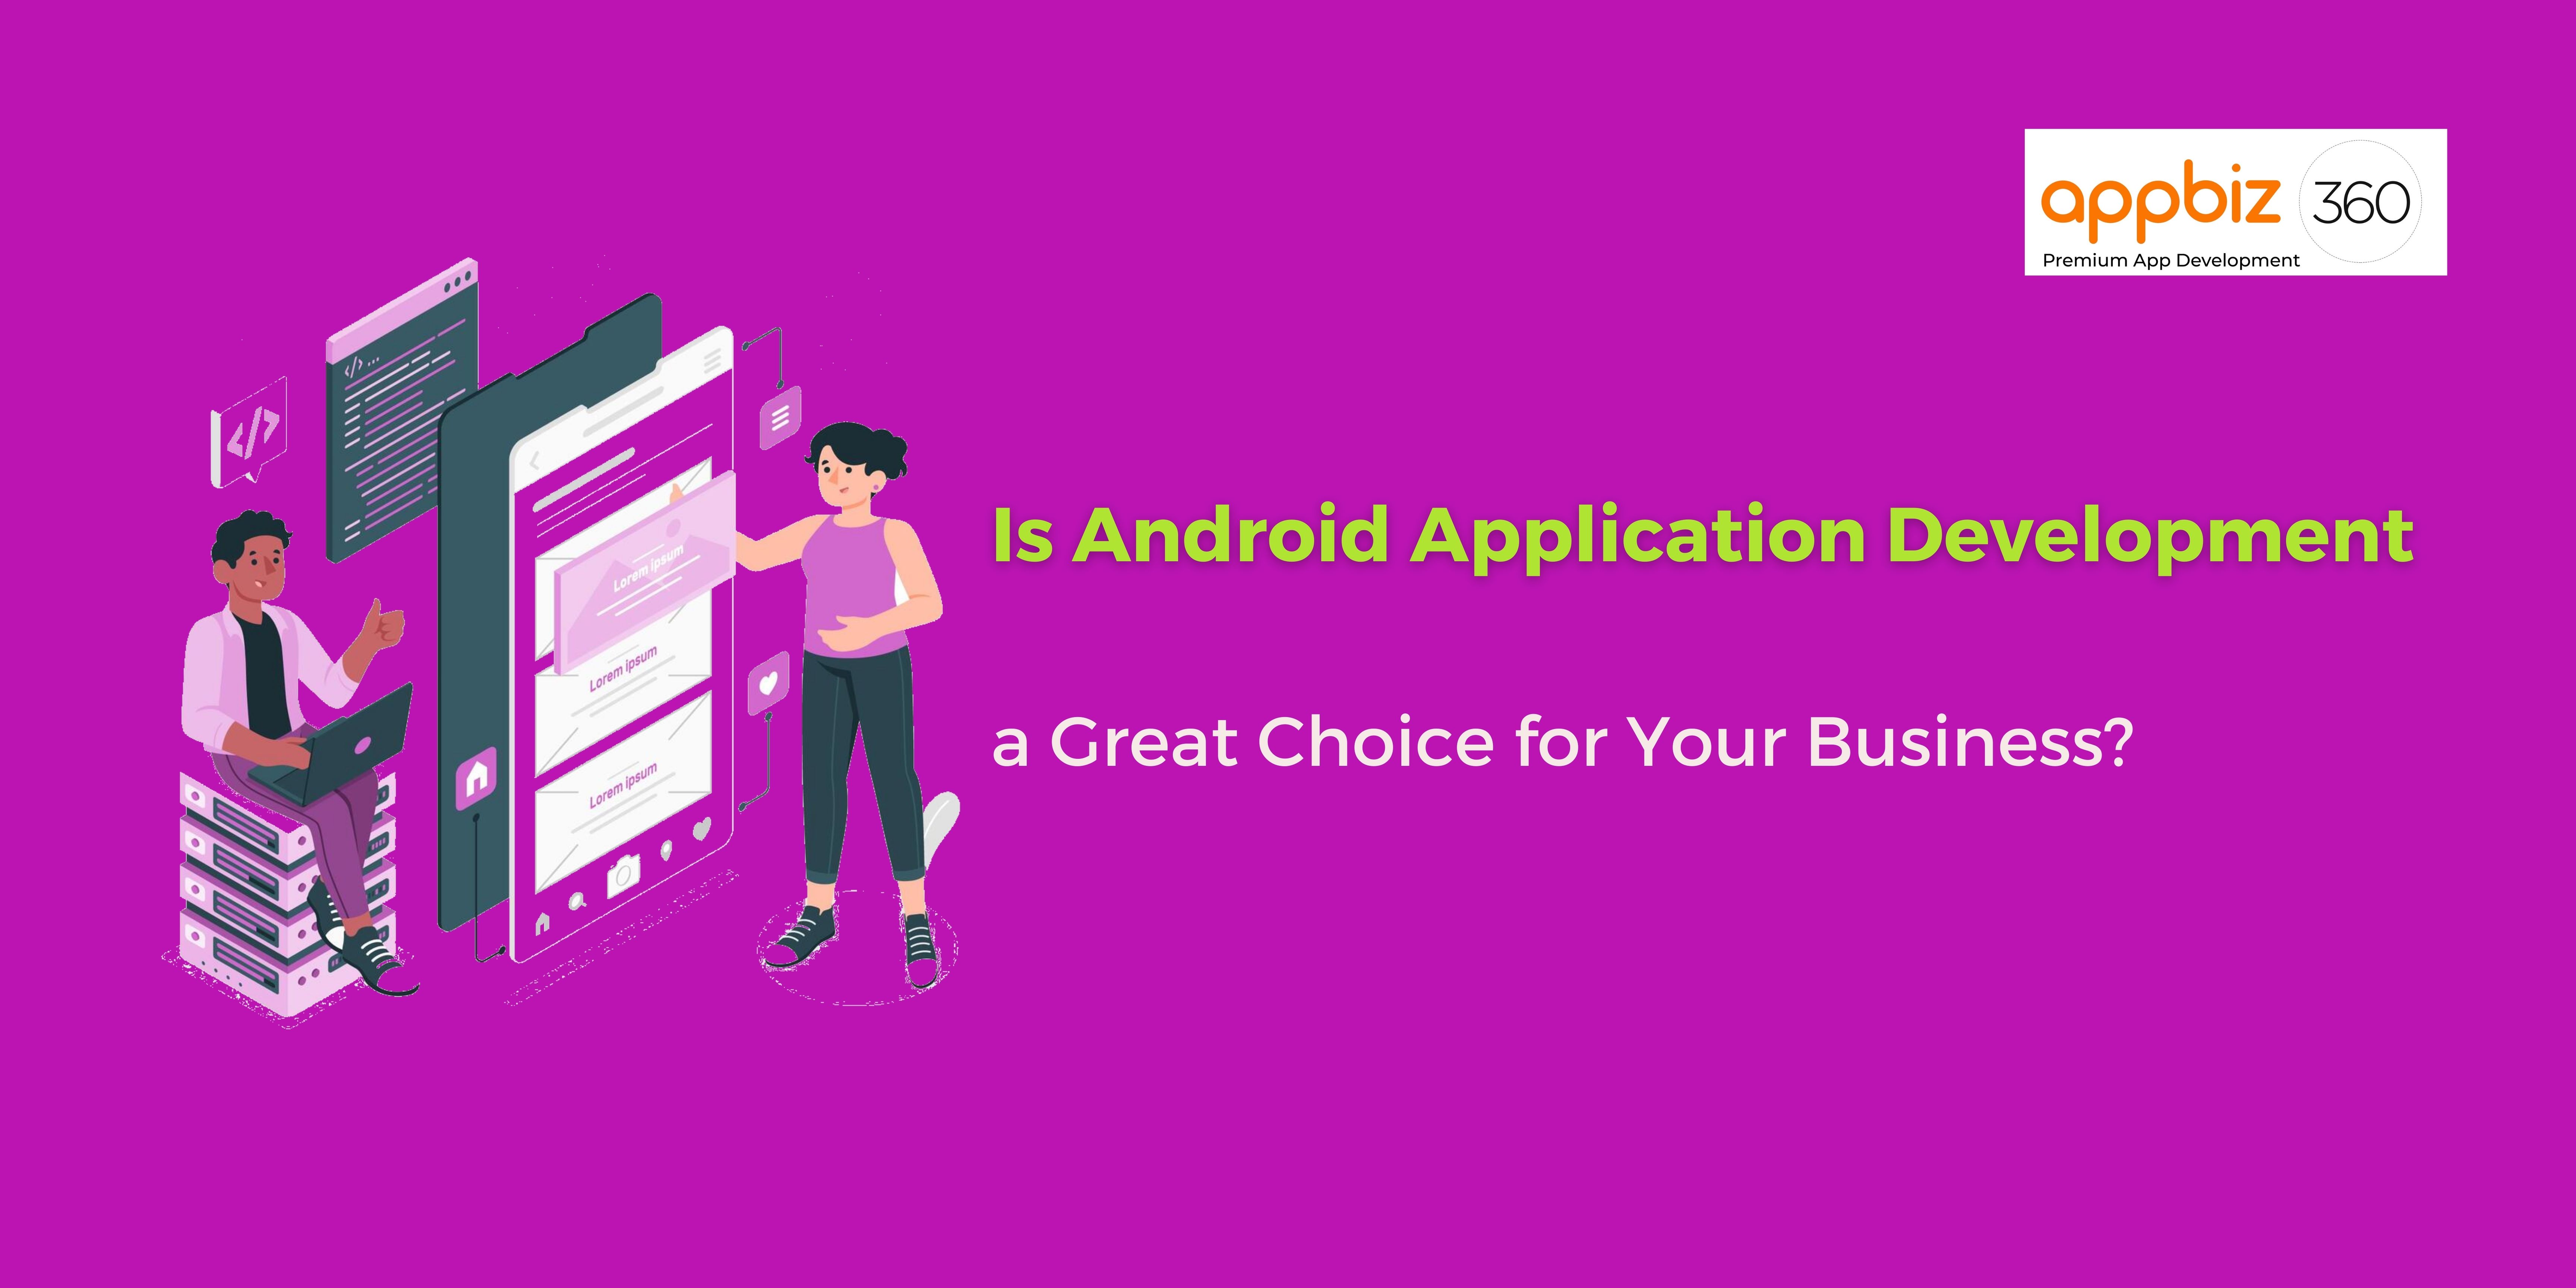 Is Android Application Development a Great Choice for Your Business?